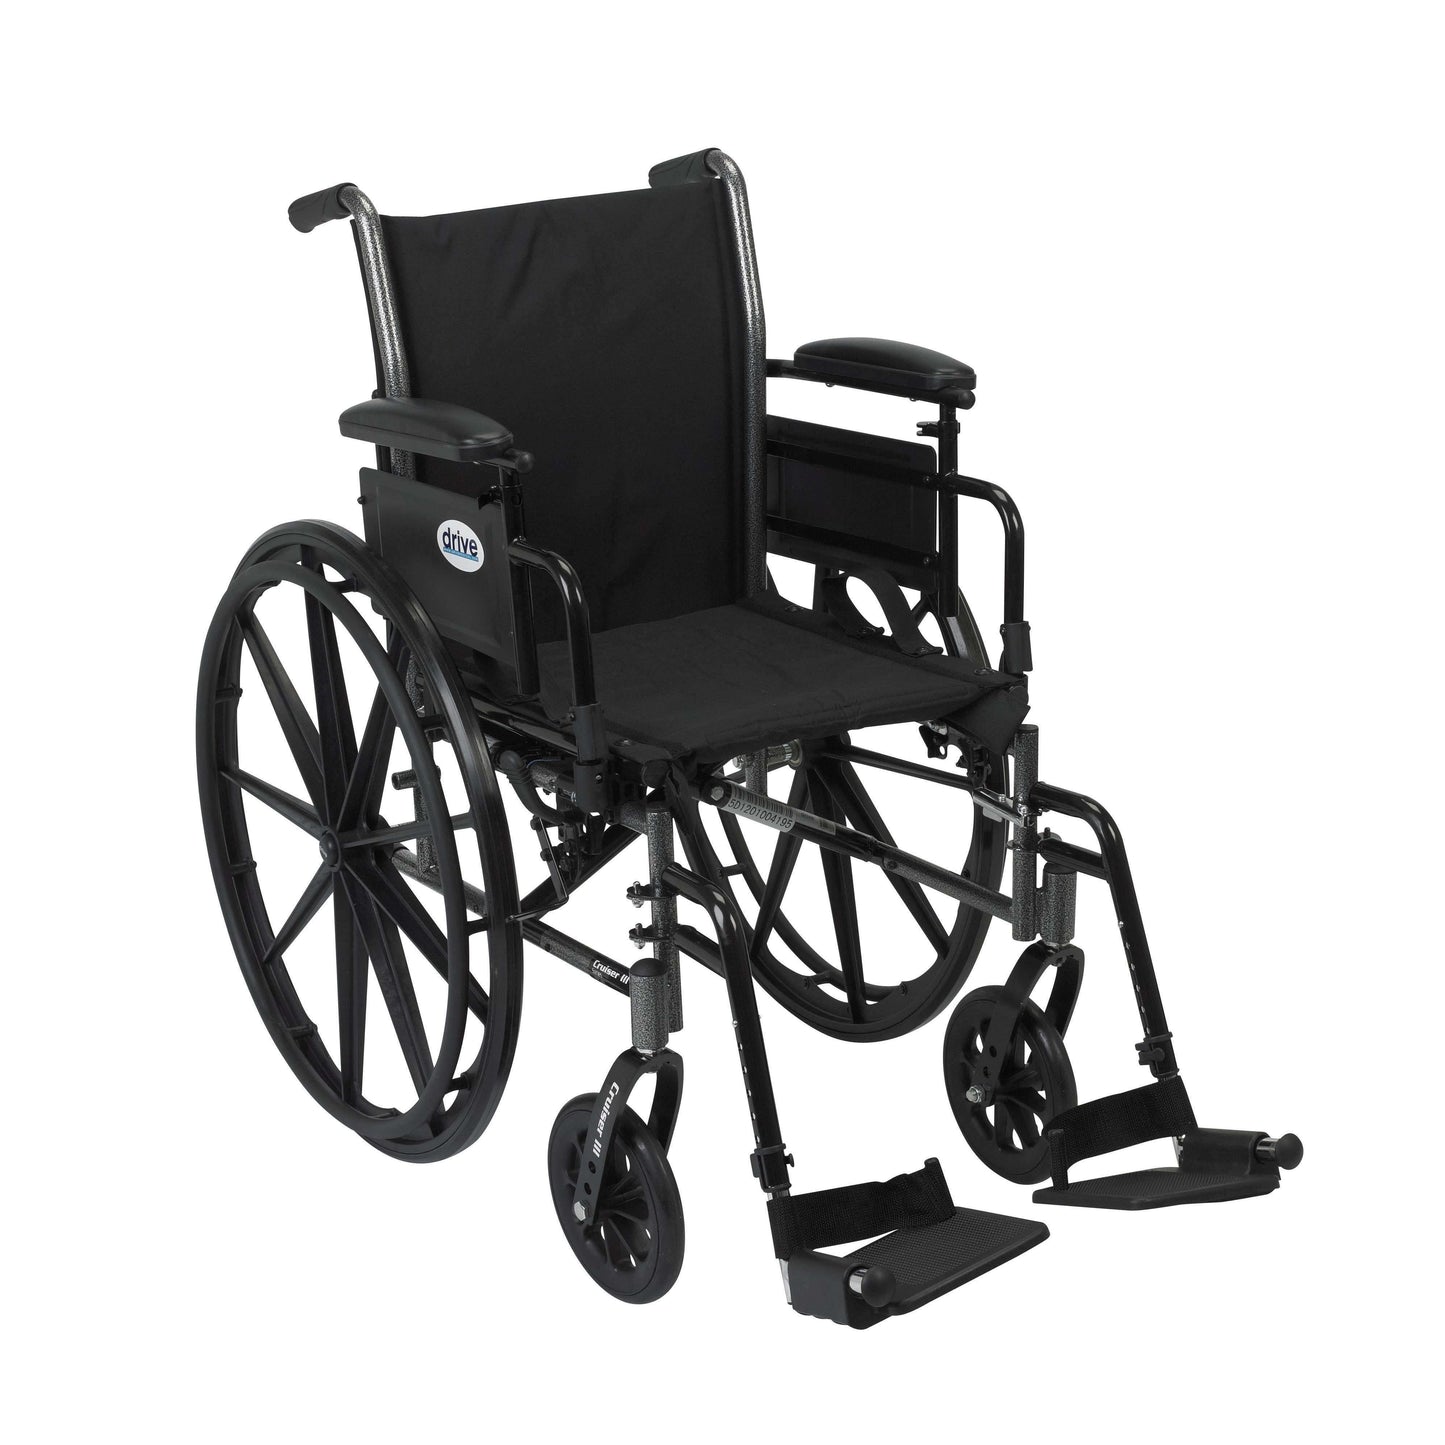 Drive k318adda-sf Cruiser III Light Weight Wheelchair with Flip Back Removable Arms, Adjustable Height Desk Arms, Swing away Footrests, 18"